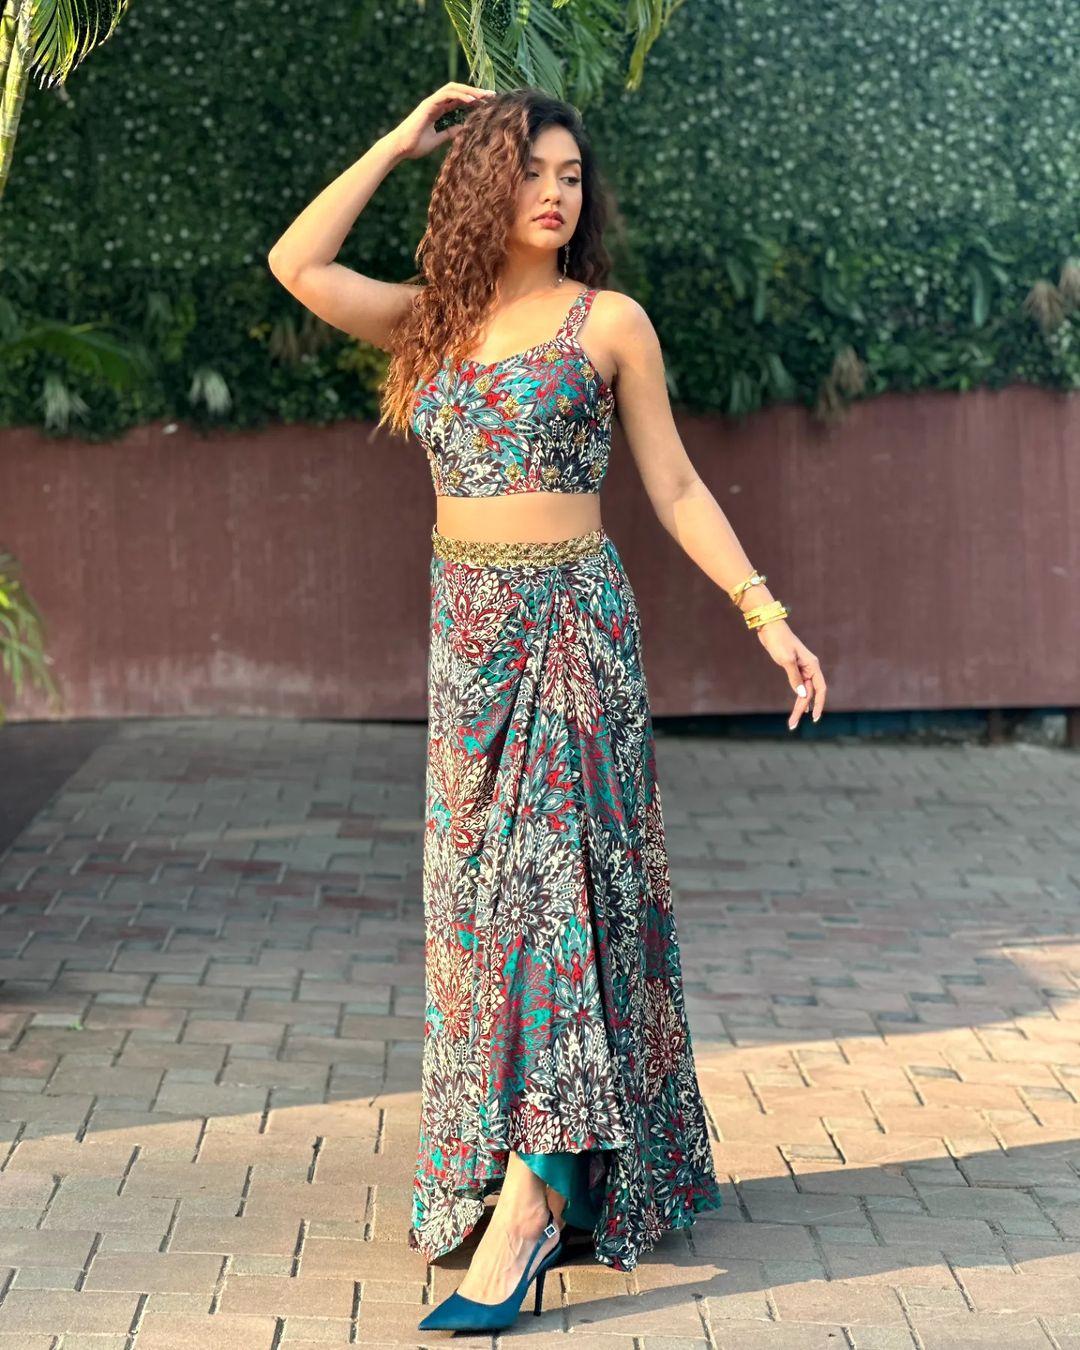 Divya donned this beautiful multicolour co-ord skirt set and added curls to her hair, which makes her look ravishing